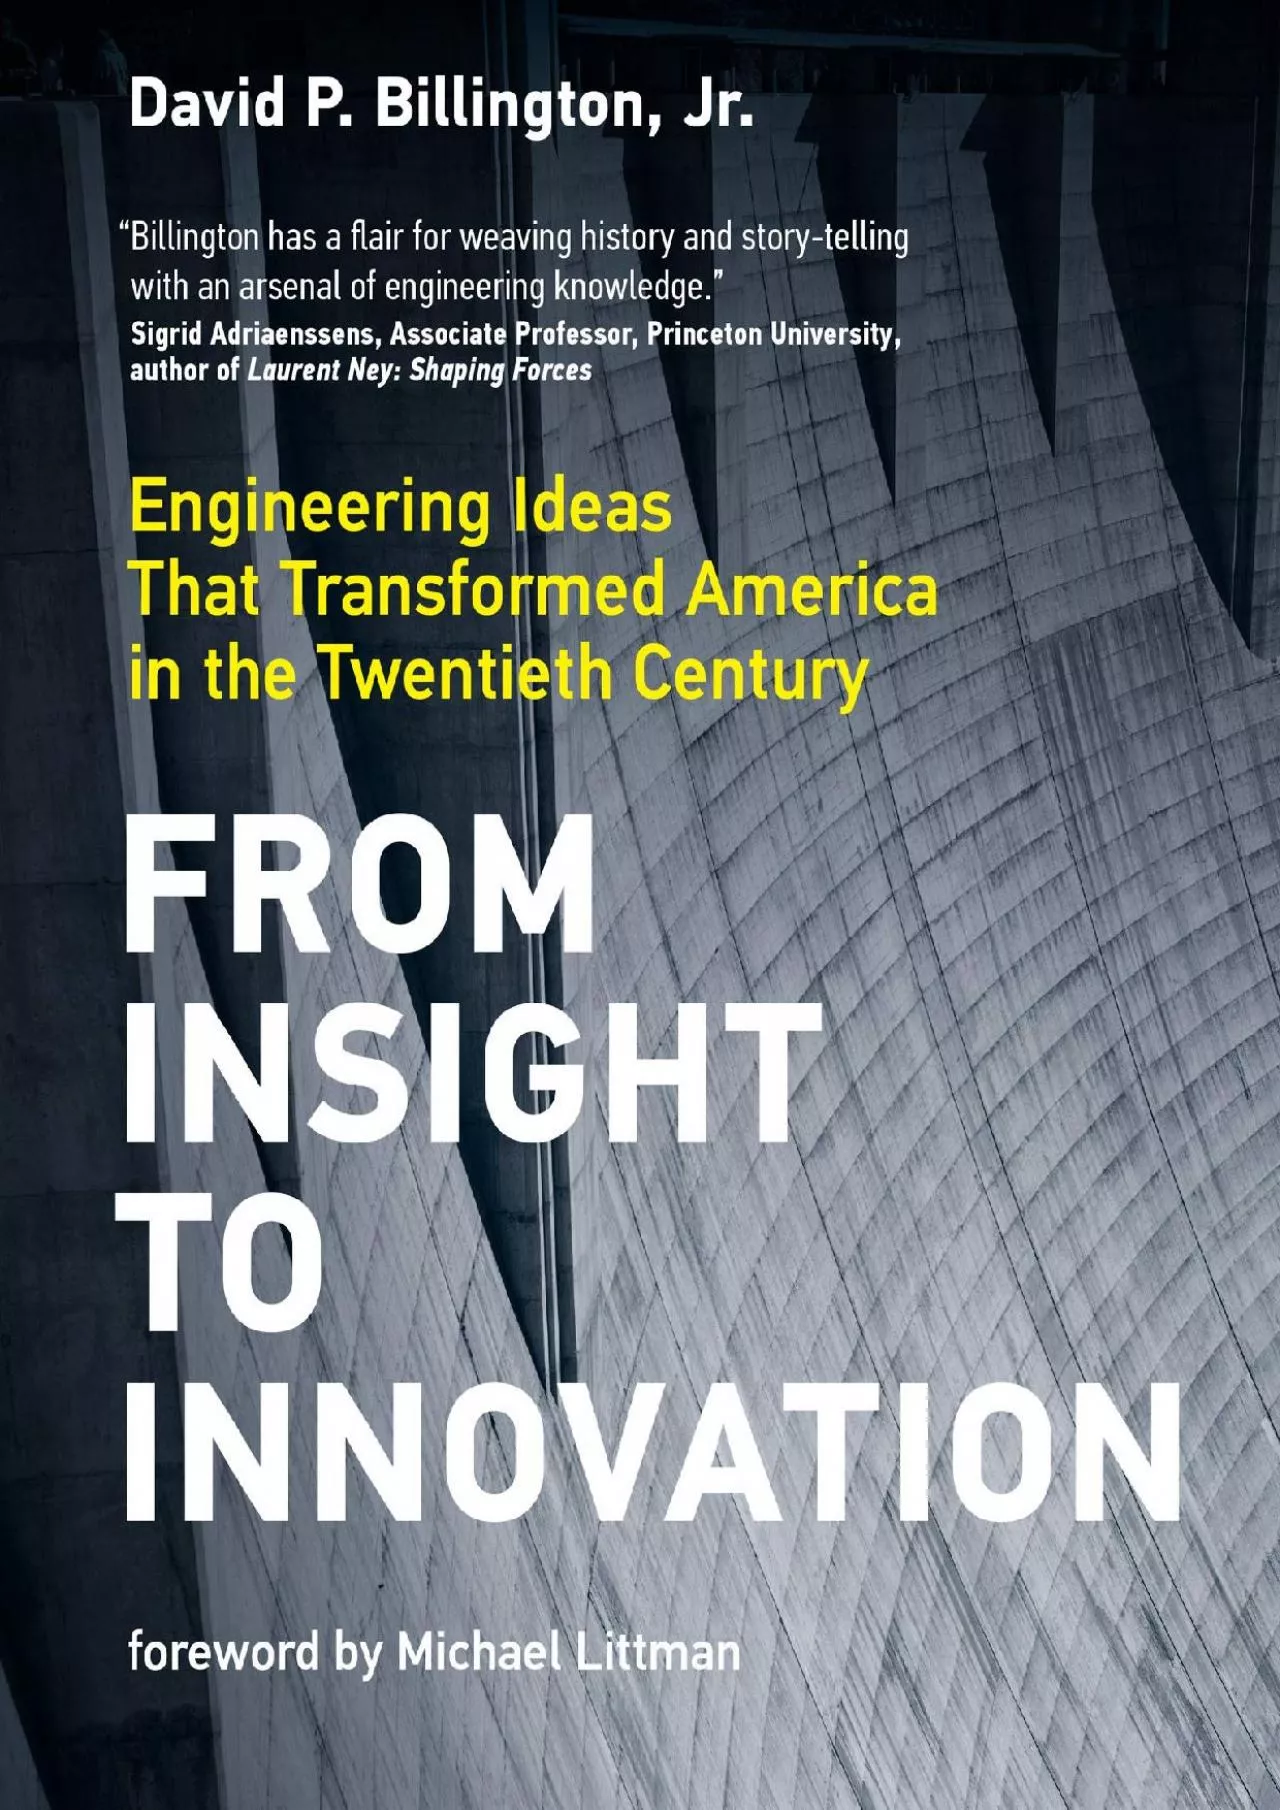 [EBOOK]-From Insight to Innovation: Engineering Ideas That Transformed America in the